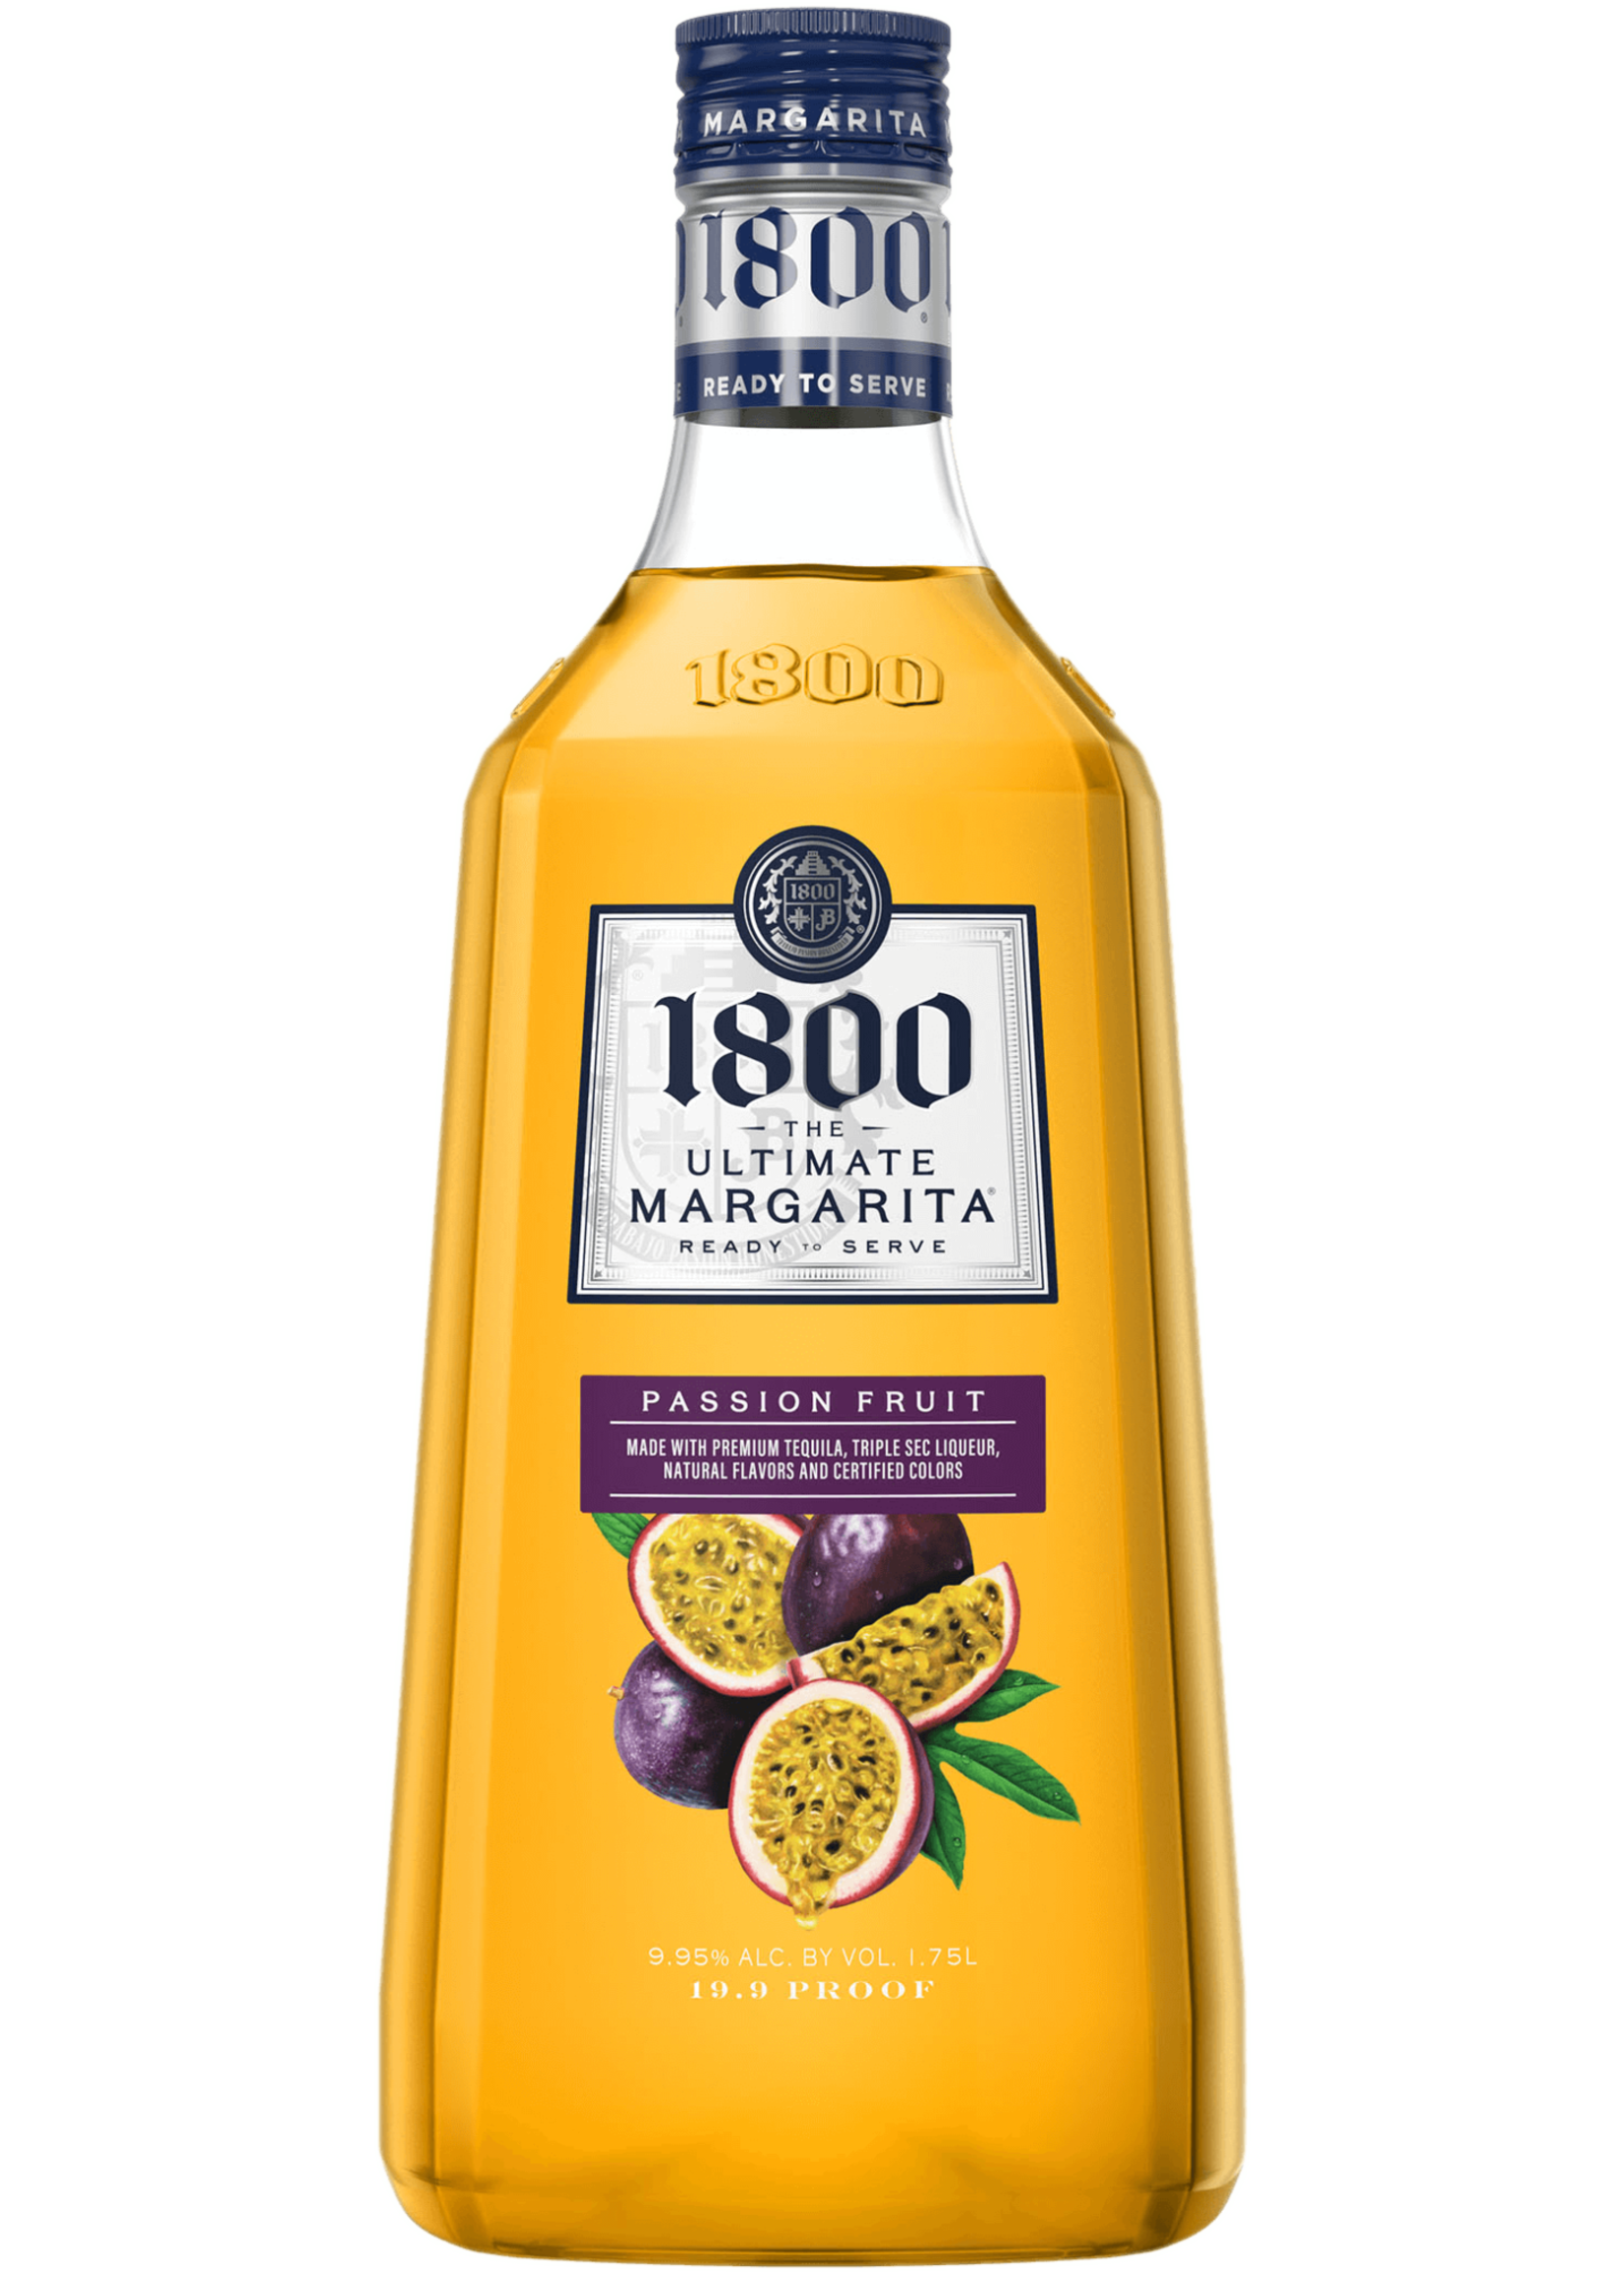 1800 Tequila 1800 RTD Margarita Passion Fruit 19.9Proof 1.75 Ltr